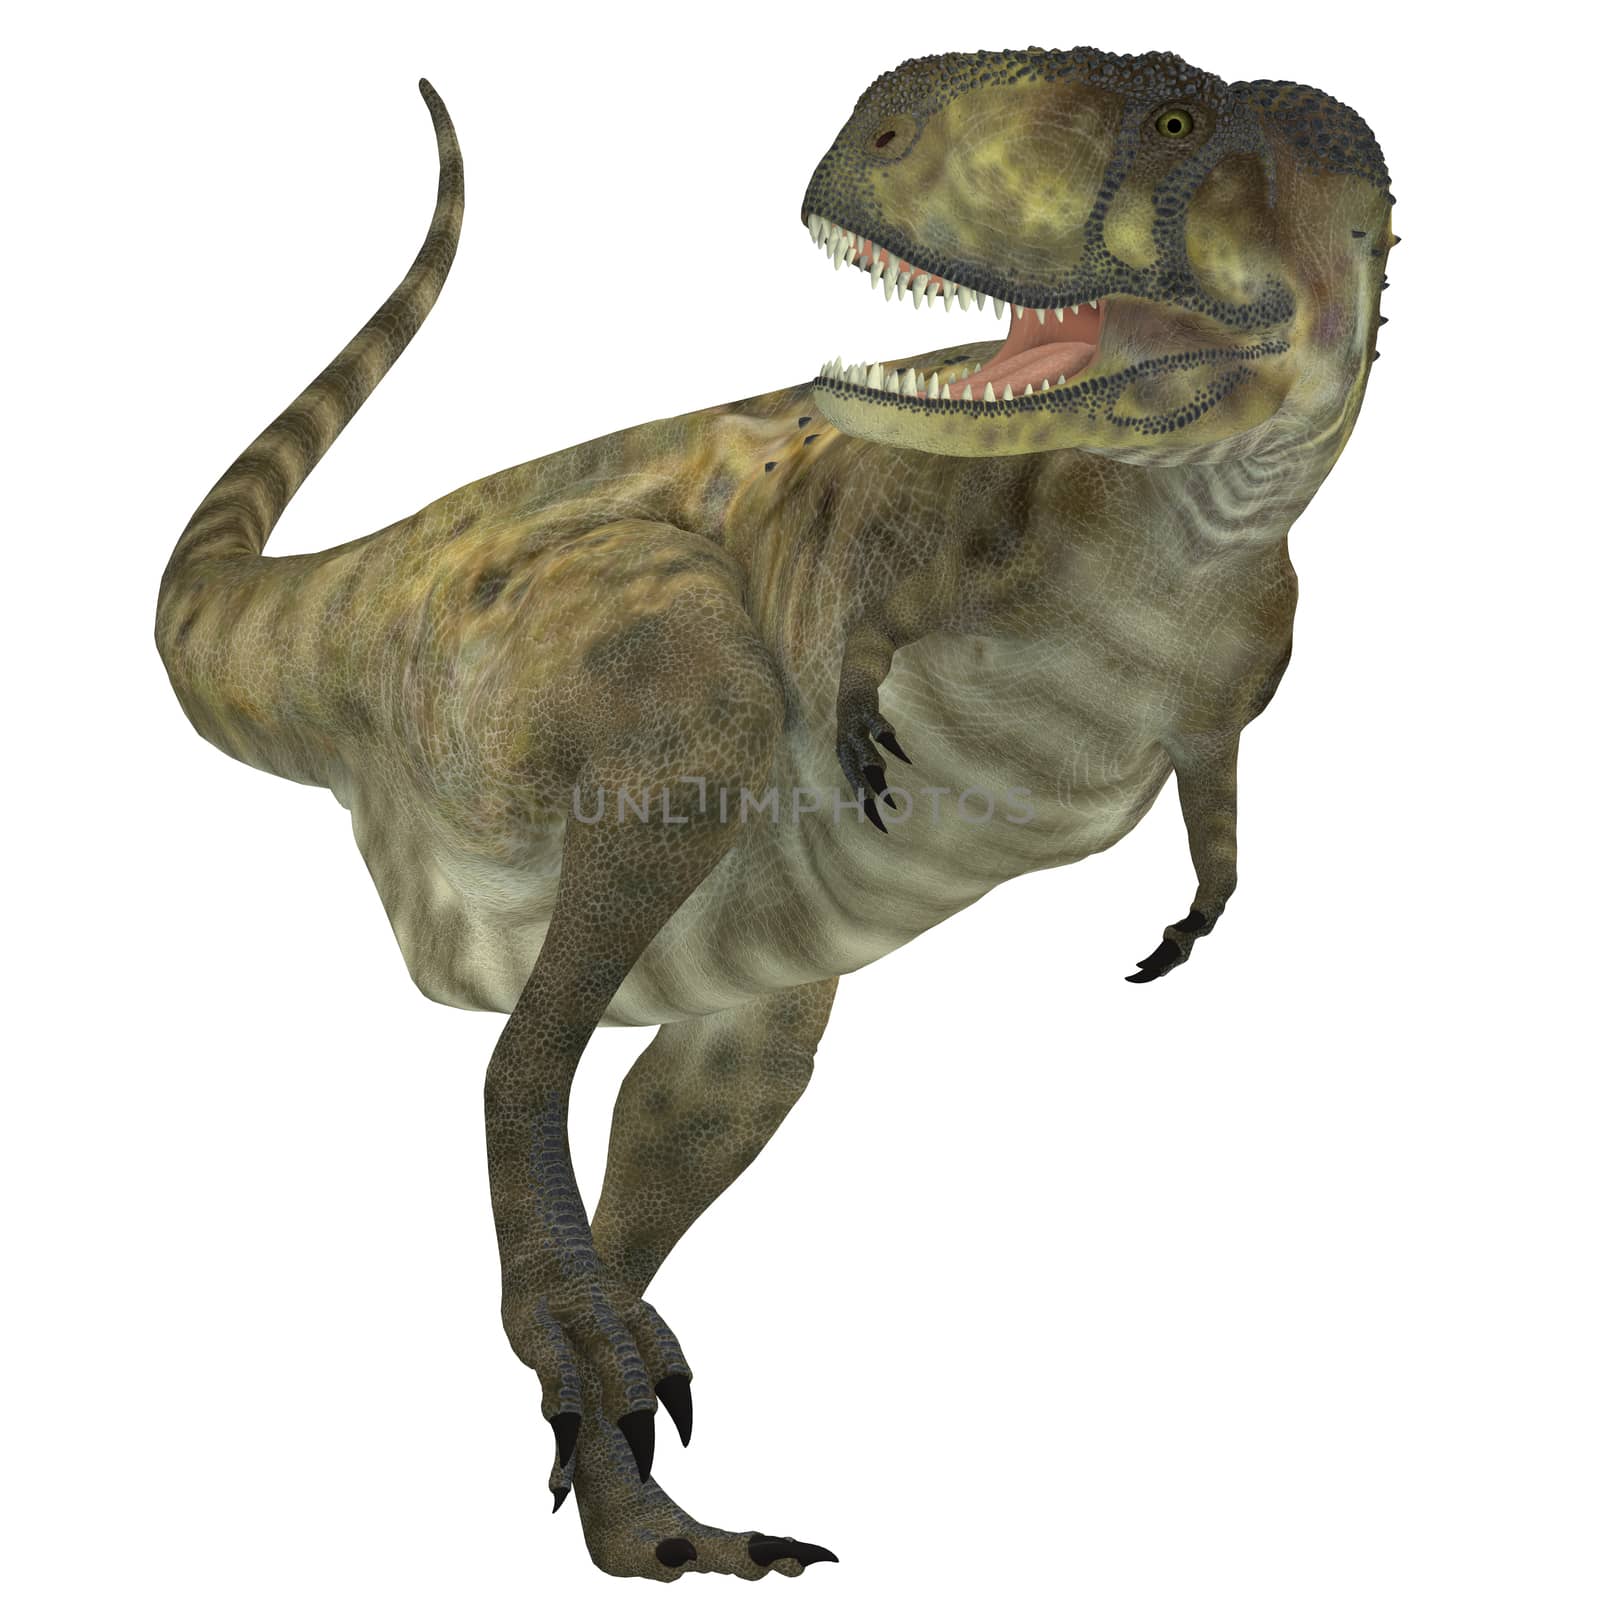 Abelisaurus was a carnivorous theropod dinosaur that lived in the Cretaceous Period of Argentina.